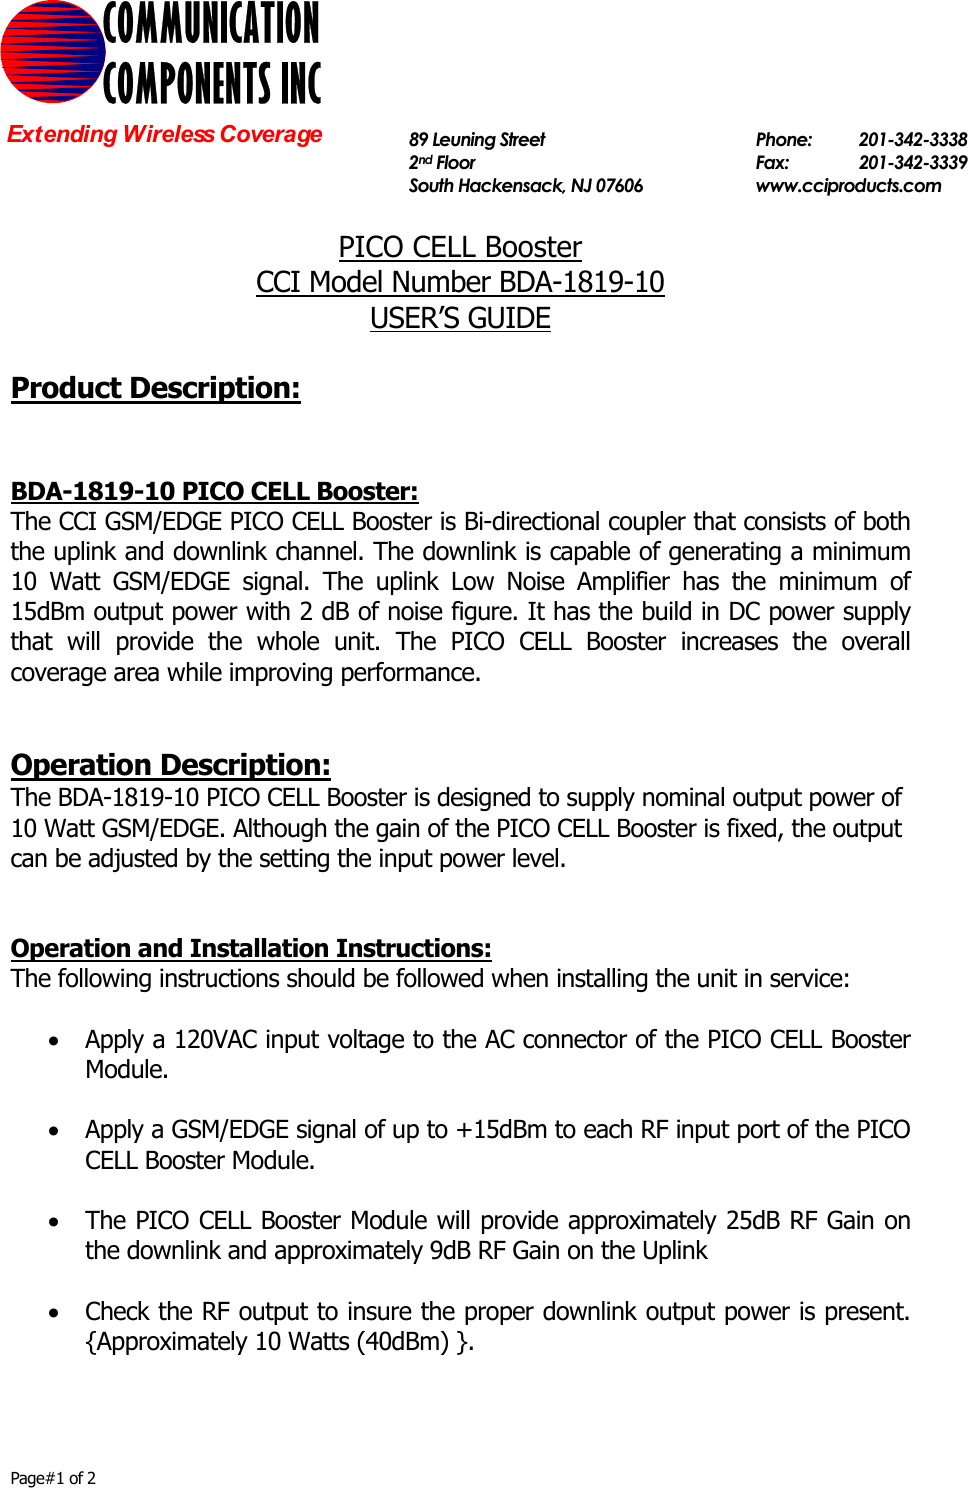     Page#1 of 2   PICO CELL Booster  CCI Model Number BDA-1819-10 USER’S GUIDE  Product Description:   BDA-1819-10 PICO CELL Booster: The CCI GSM/EDGE PICO CELL Booster is Bi-directional coupler that consists of both the uplink and downlink channel. The downlink is capable of generating a minimum 10 Watt GSM/EDGE signal. The uplink Low Noise Amplifier has the minimum of 15dBm output power with 2 dB of noise figure. It has the build in DC power supply that will provide the whole unit. The PICO CELL Booster increases the overall coverage area while improving performance.   Operation Description: The BDA-1819-10 PICO CELL Booster is designed to supply nominal output power of 10 Watt GSM/EDGE. Although the gain of the PICO CELL Booster is fixed, the output can be adjusted by the setting the input power level.   Operation and Installation Instructions: The following instructions should be followed when installing the unit in service:  • Apply a 120VAC input voltage to the AC connector of the PICO CELL Booster Module.  • Apply a GSM/EDGE signal of up to +15dBm to each RF input port of the PICO CELL Booster Module.  • The PICO CELL Booster Module will provide approximately 25dB RF Gain on the downlink and approximately 9dB RF Gain on the Uplink  • Check the RF output to insure the proper downlink output power is present. {Approximately 10 Watts (40dBm) }.  COMMUNICATION COMPONENTS INC Extending Wireless Coverage  89 Leuning Street   Phone: 201-342-3338 2nd Floor  Fax:   201-342-3339 South Hackensack, NJ 07606   www.cciproducts.com  